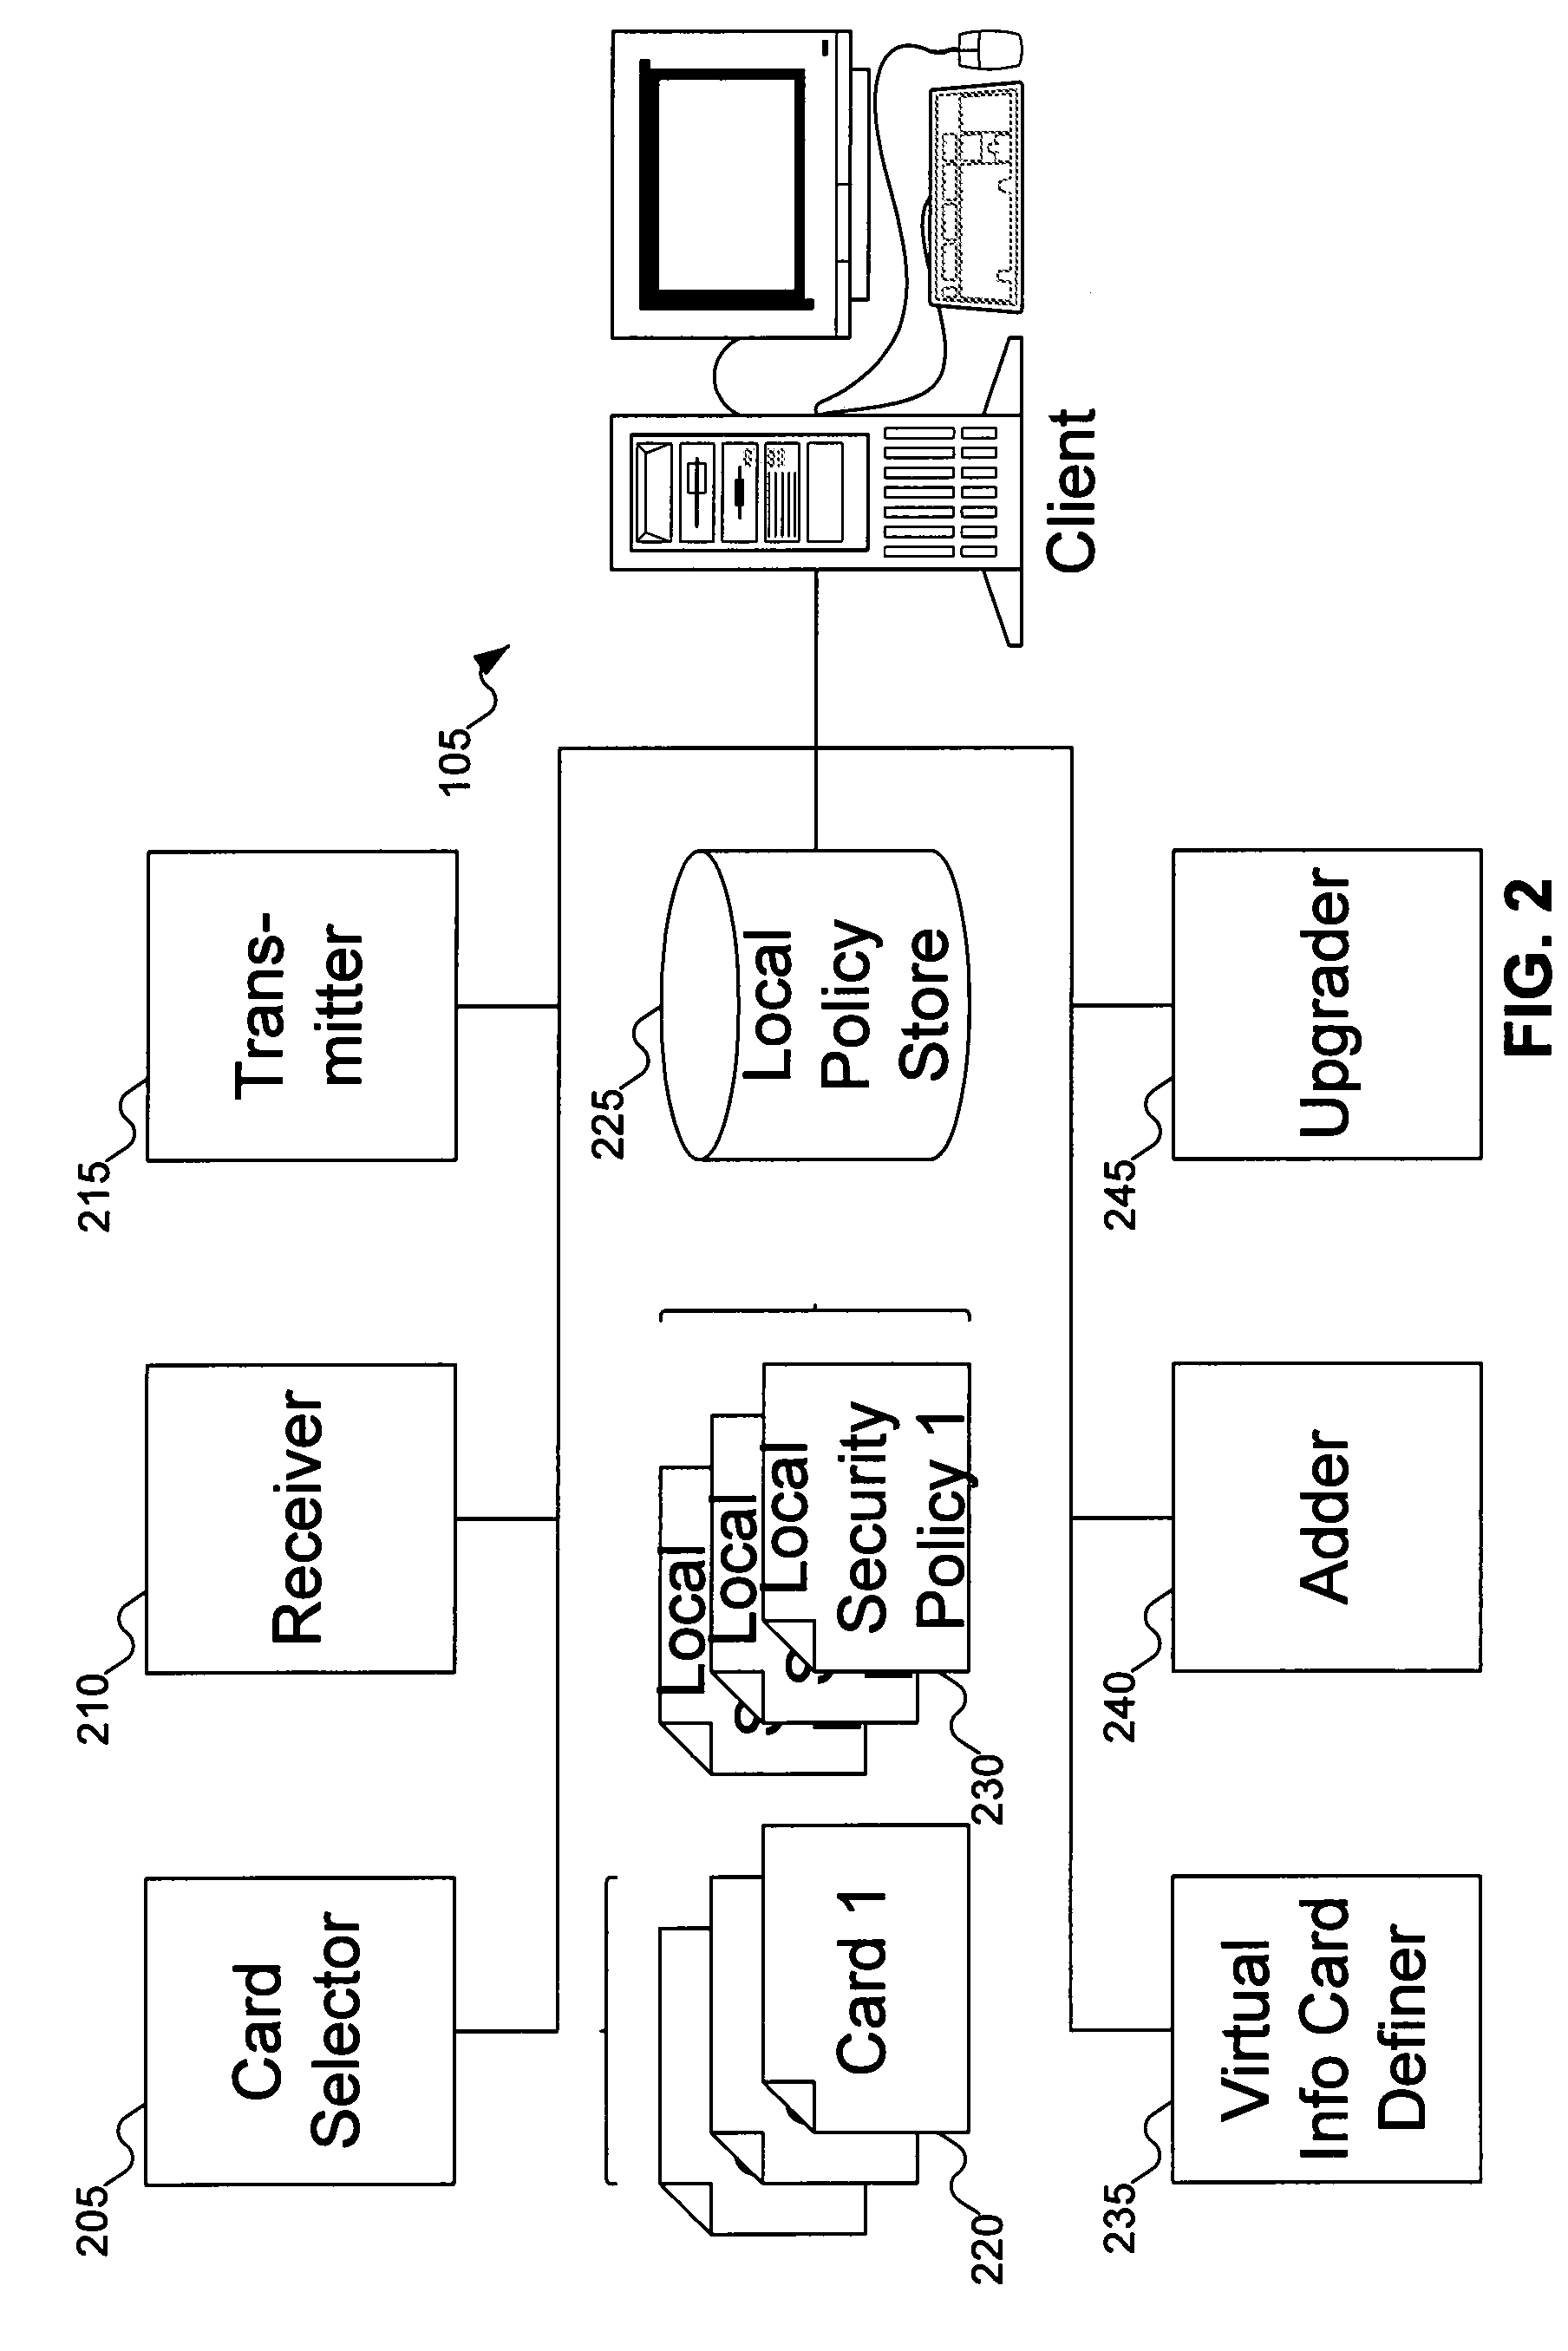 System and method for virtual information cards